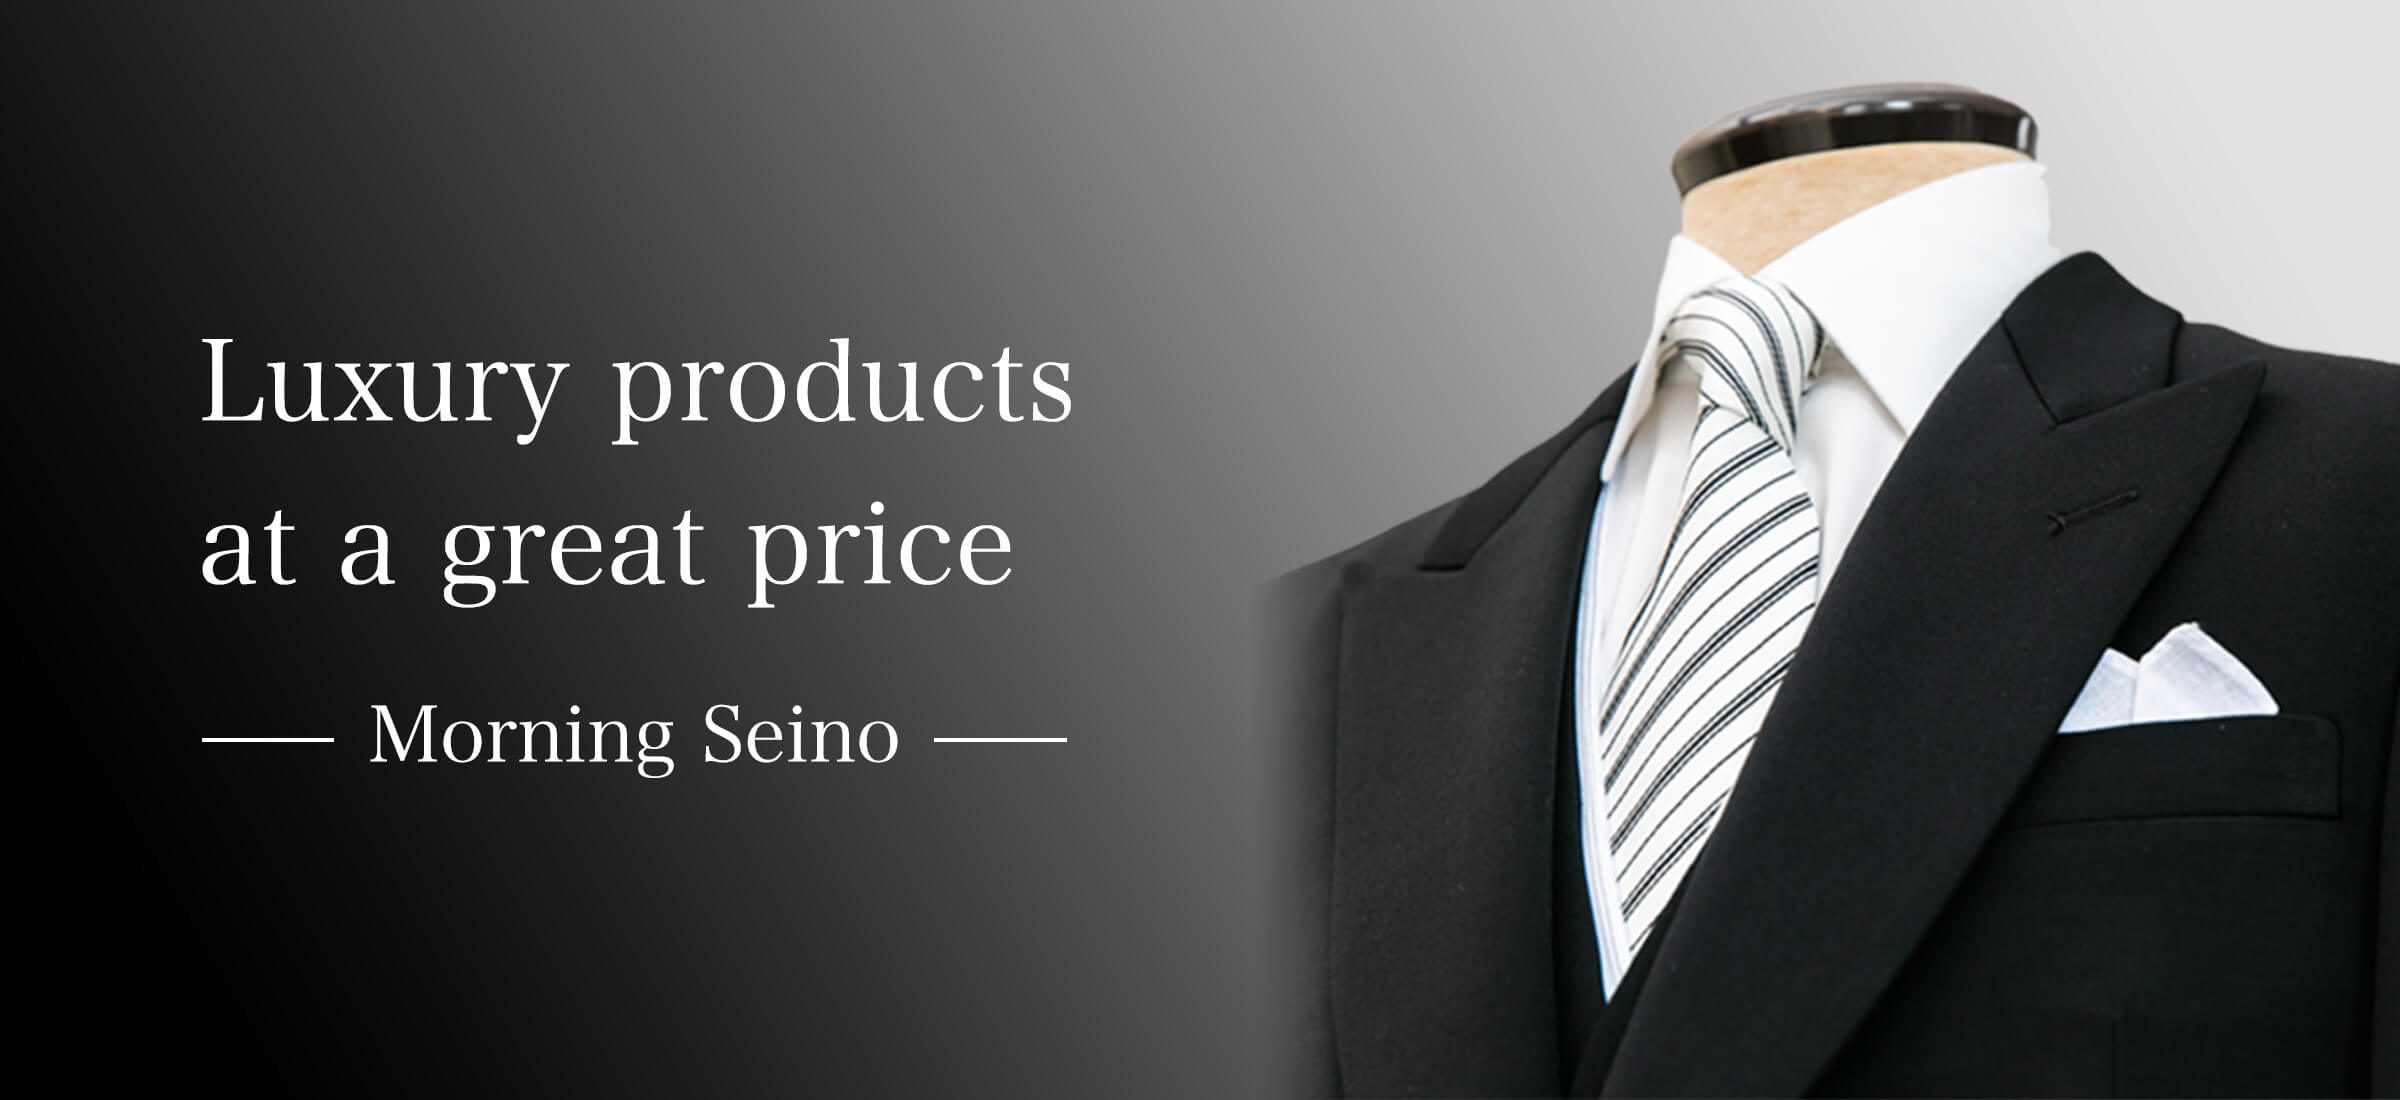 Luxury products at a great price ーMorning Seinoー